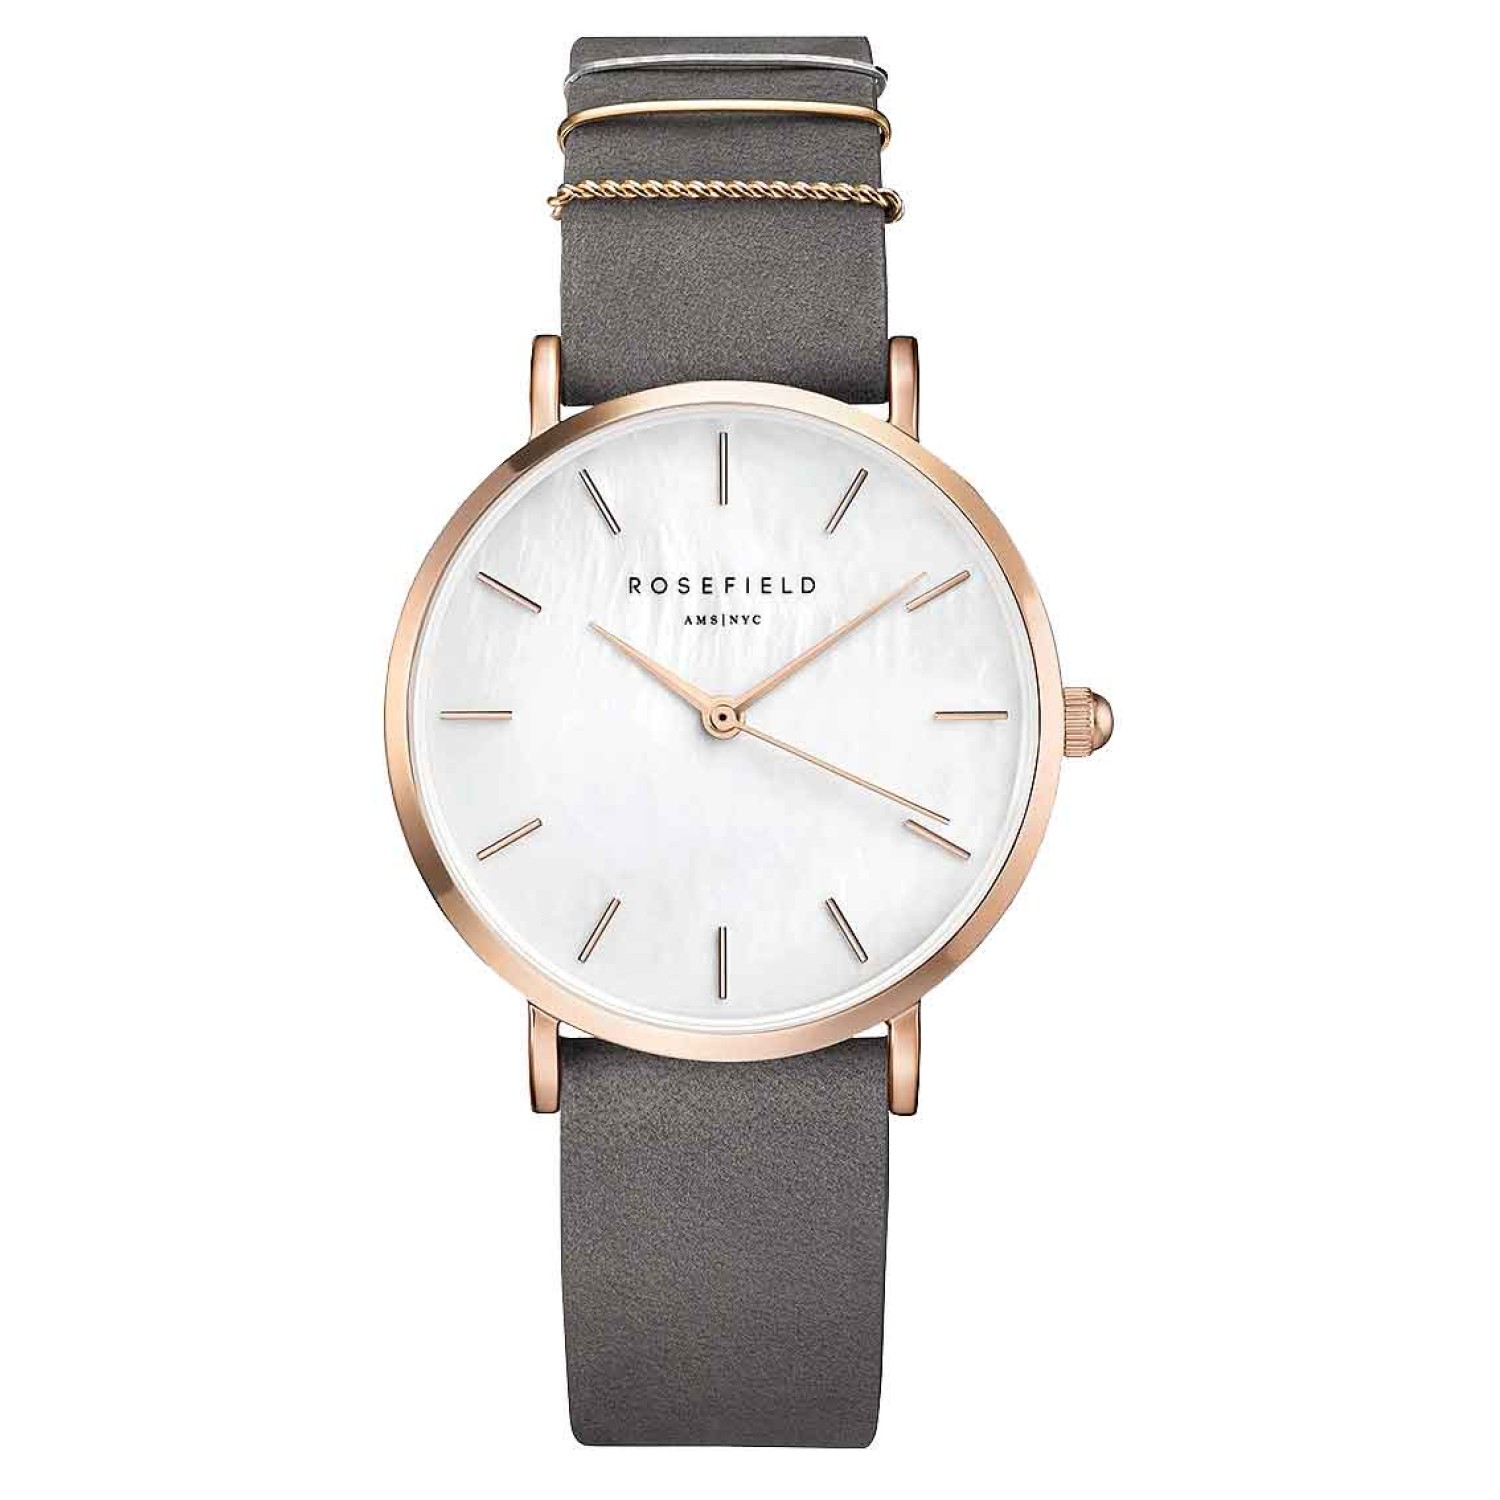 WEGR-W75 Rosefield Rose Gold WEST VILLAGE Mother of Pearl Watch. The WEST VILLAGE: The iconic and traditionally rebellious neighborhood of the West Village – a nonchalant area with European flair – is the inspiration behind this collection. The watch has 